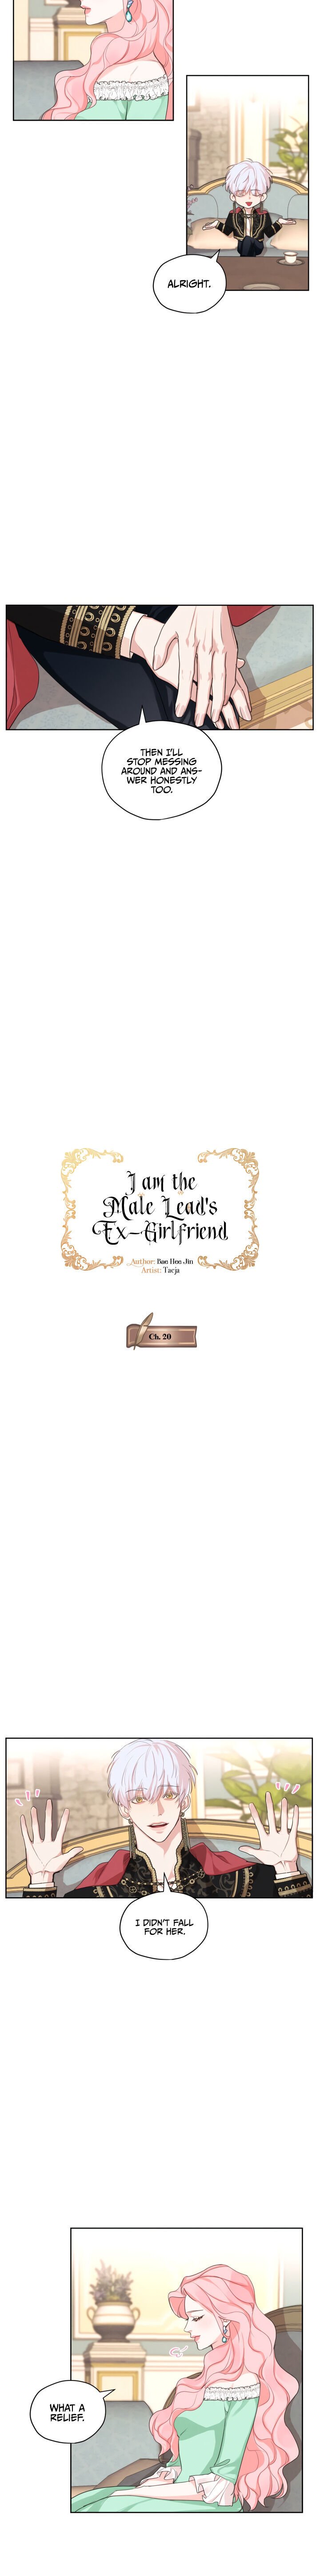 I Am The Male Lead’S Ex-Girlfriend chapter 20